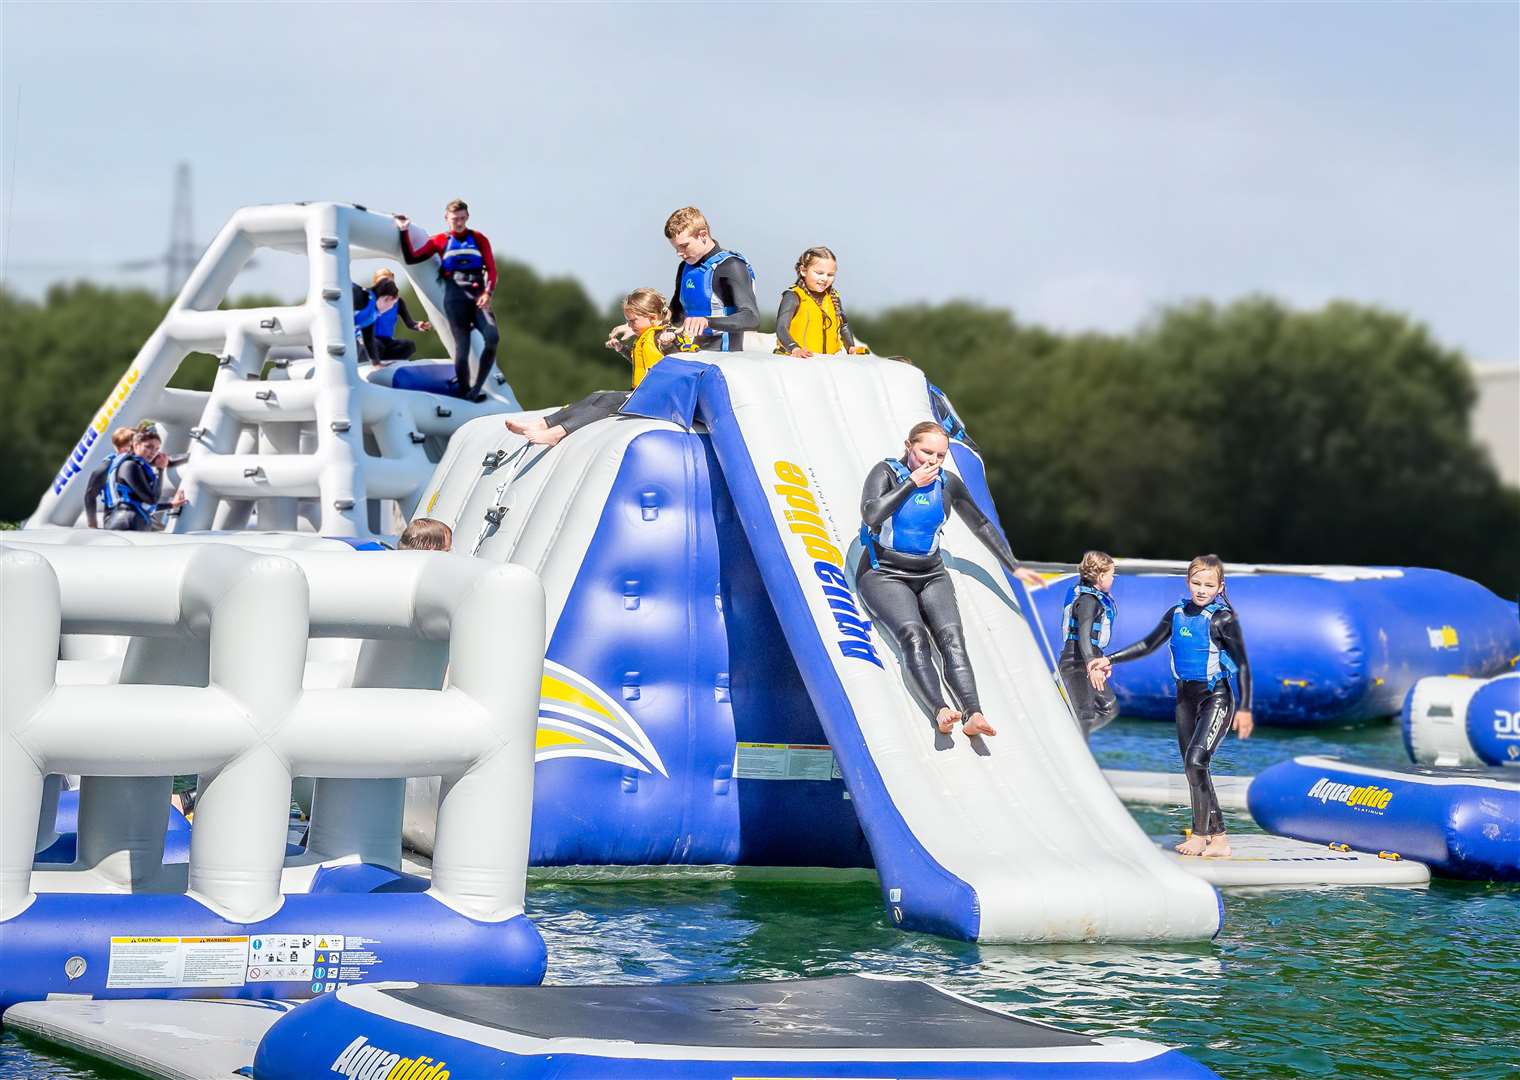 Action Watersports – in Lydd, Kent - will be opening their doors to Kent and the South East’s first Aqua Park. Pic caption JON SHRIMPTON (8459261)